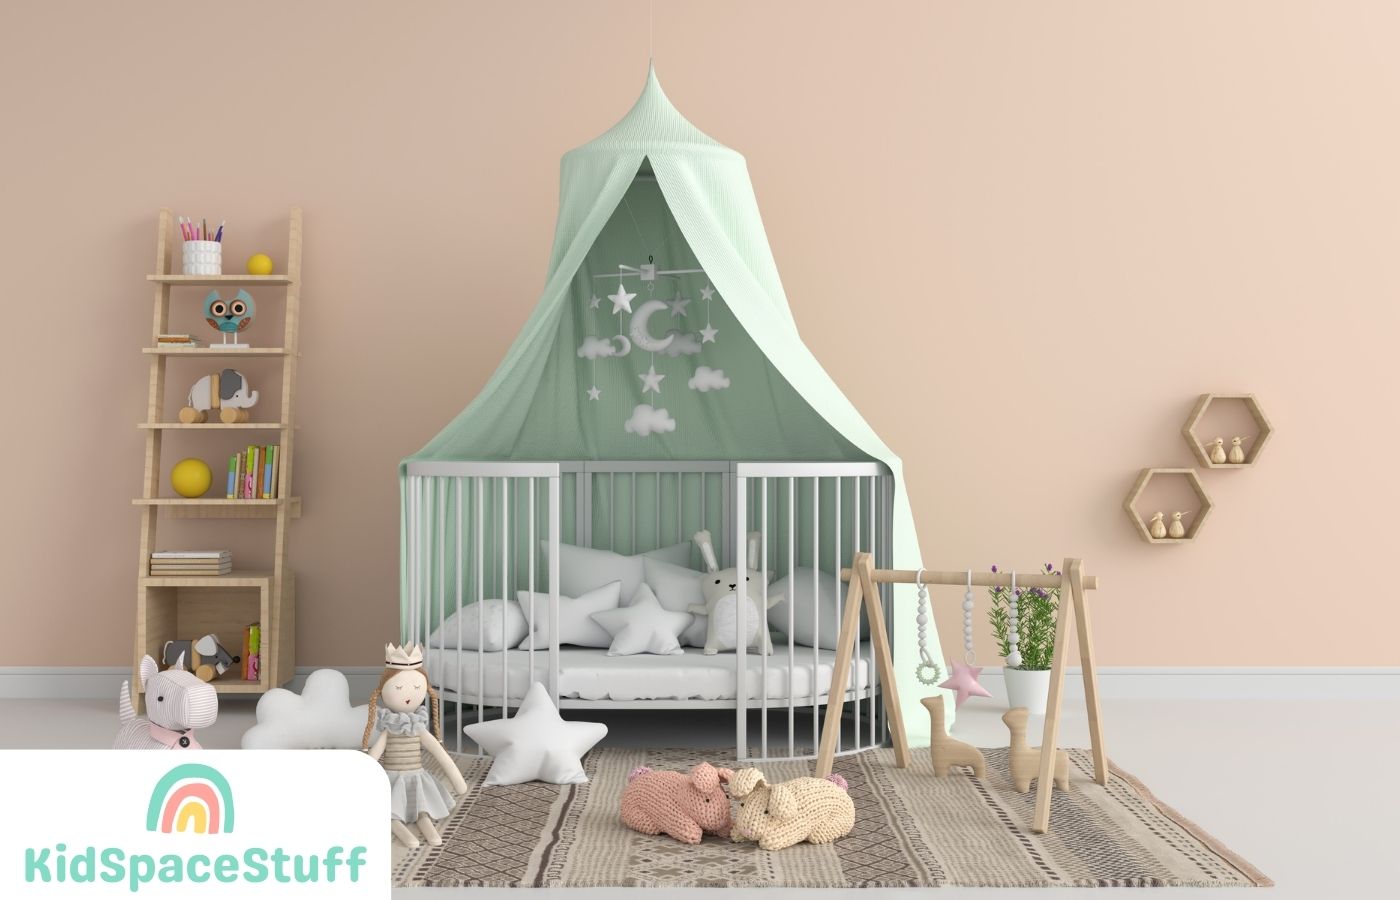 Best Paint for Kids Room: What Type is Best? (2023 Guide)